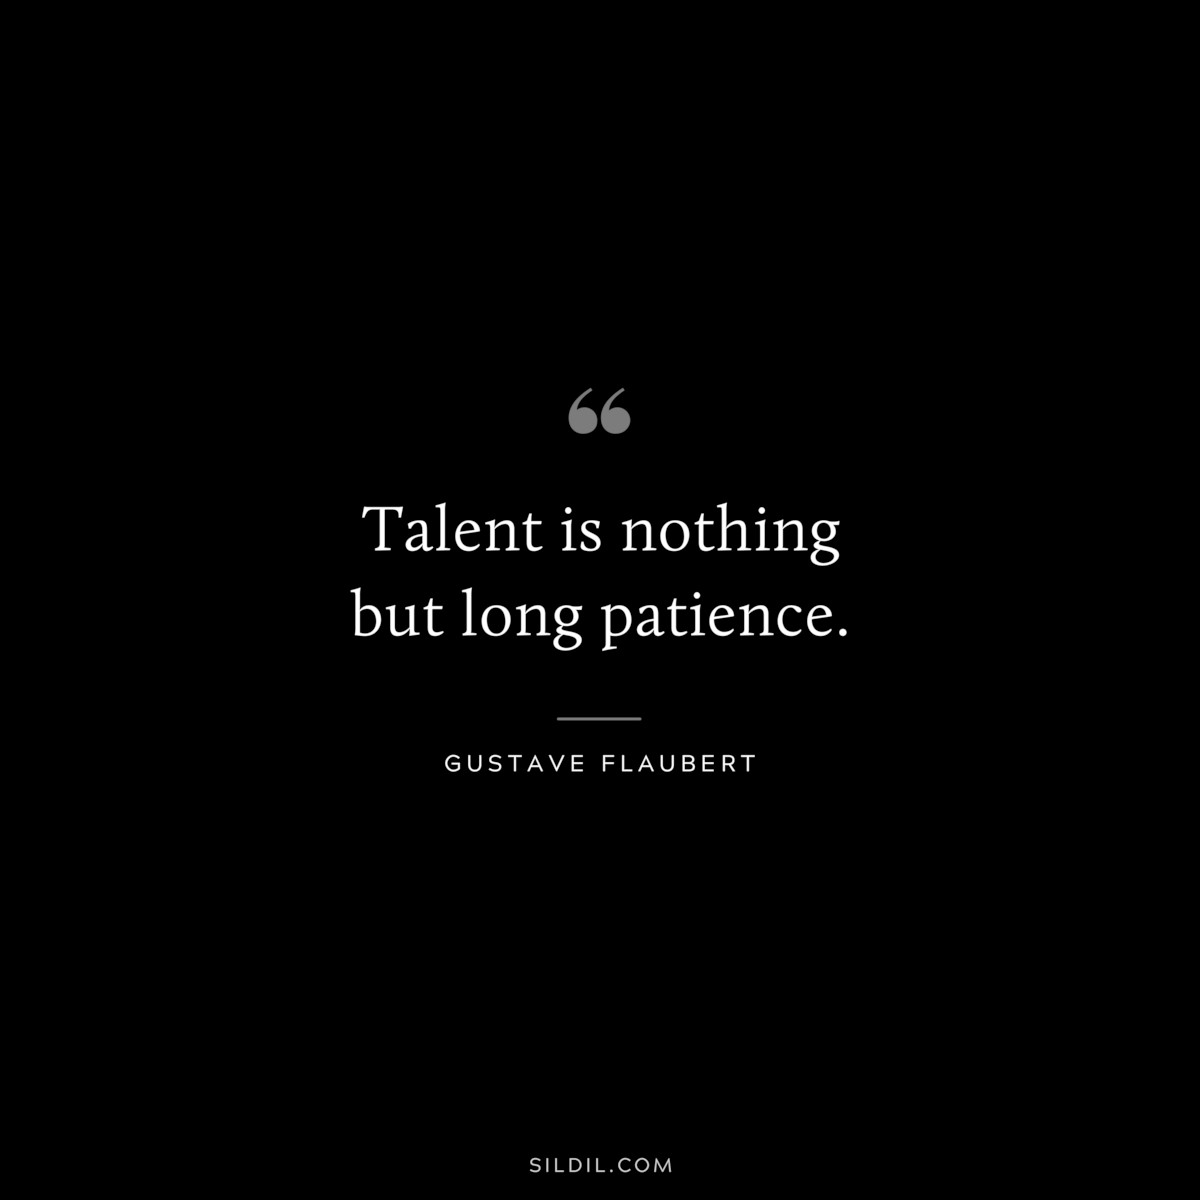 Talent is nothing but long patience. ― Gustave Flaubert